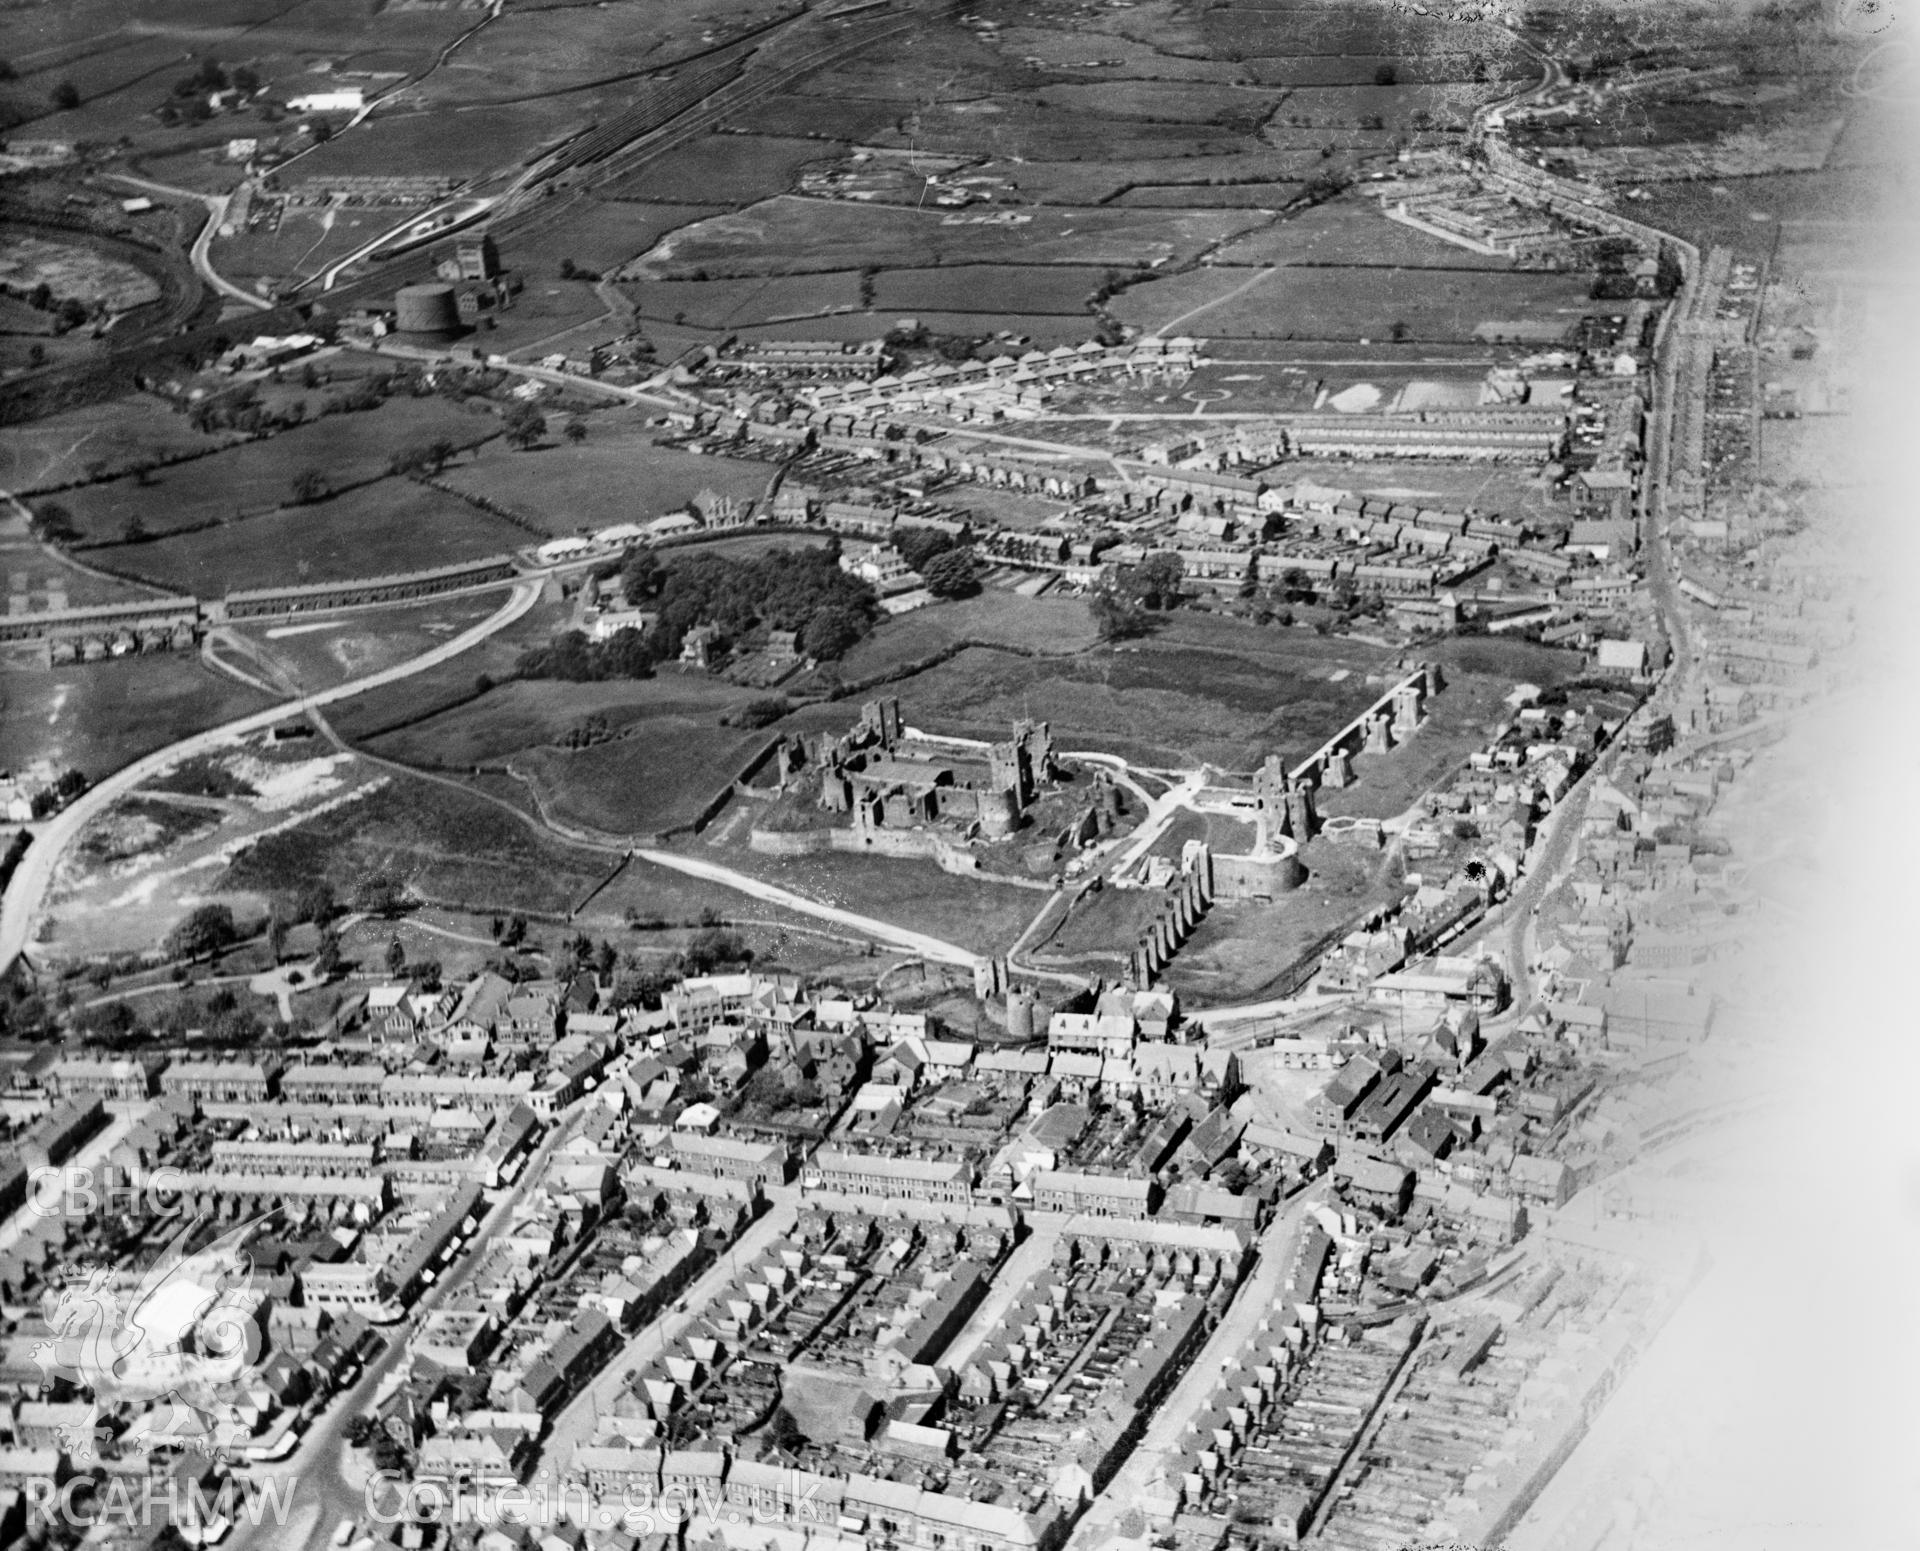 General view of Caerphilly, showing castle, oblique aerial view. 5?x4? black and white glass plate negative.